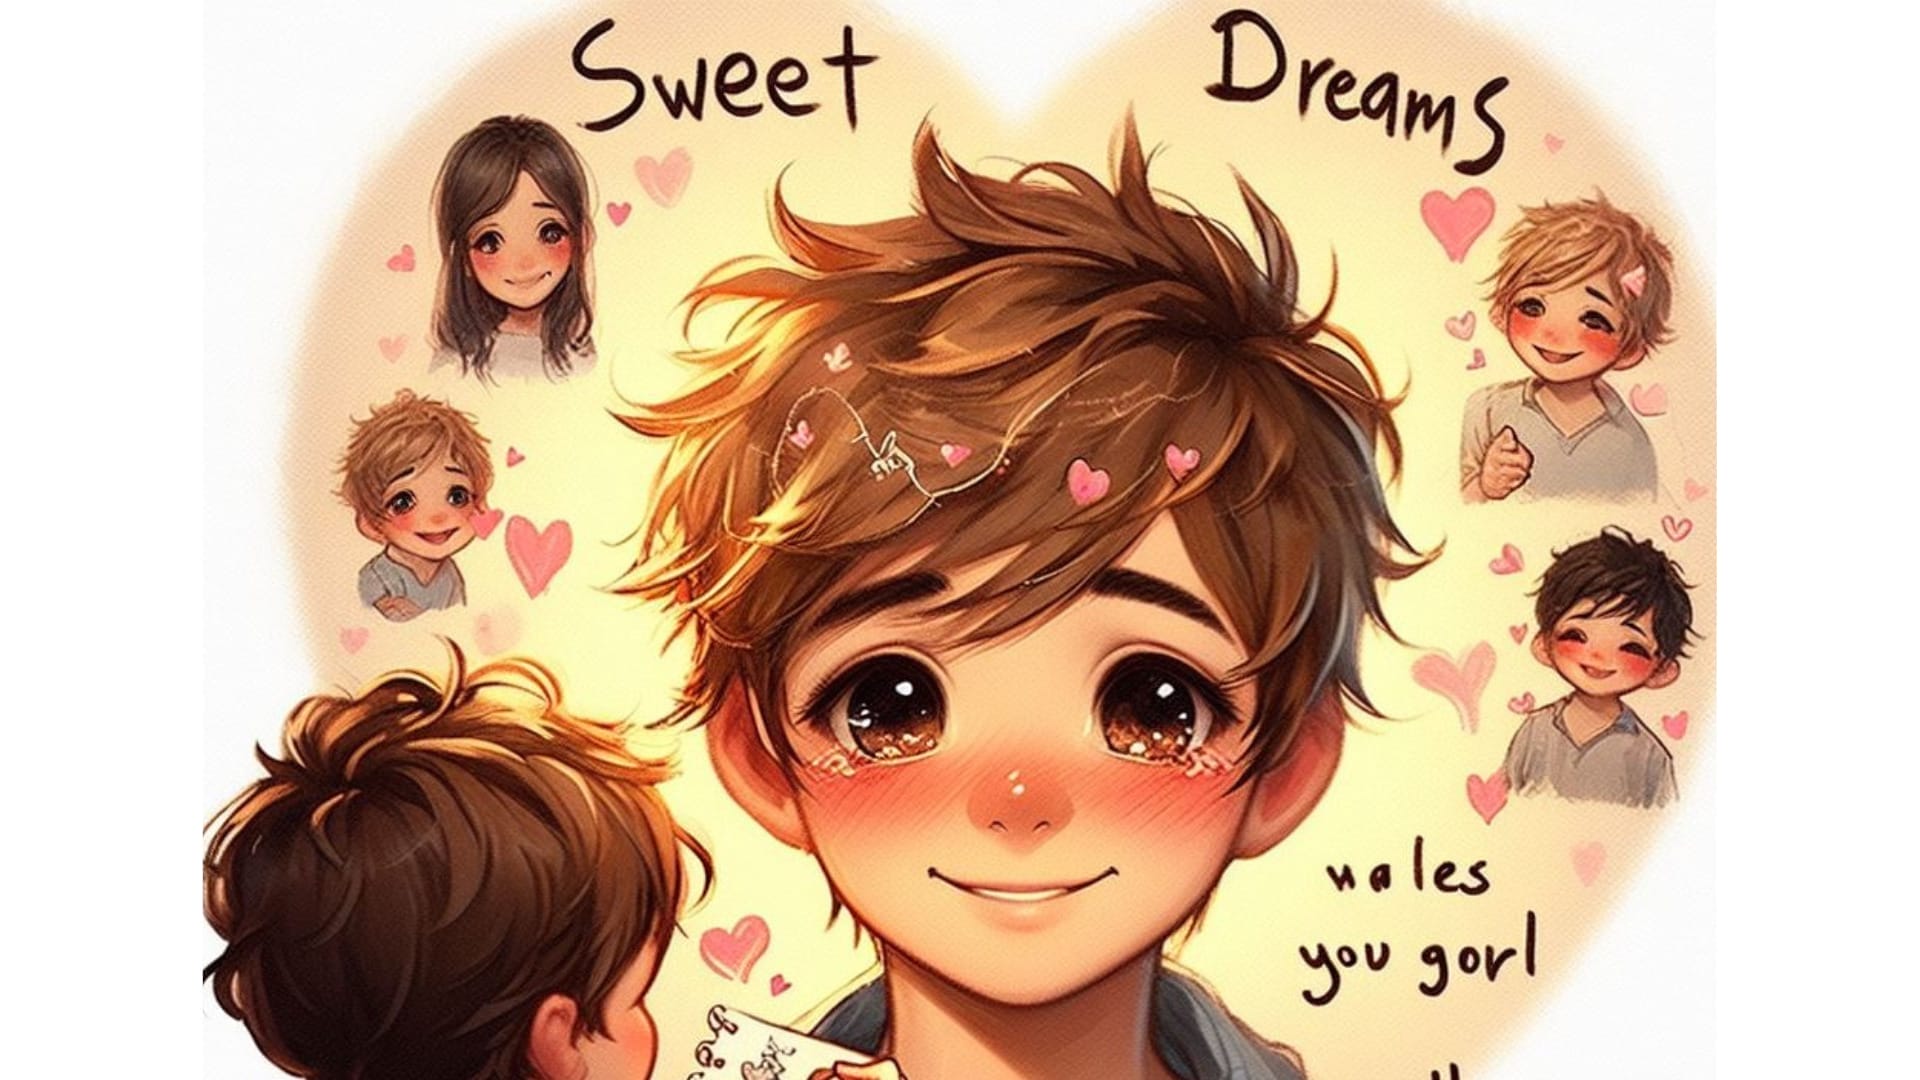 In this touching image, a boy communicates 'What does it mean when a guy says sweet dreams' in a personalized and heartwarming way to his girl, adding depth to the sentiment.